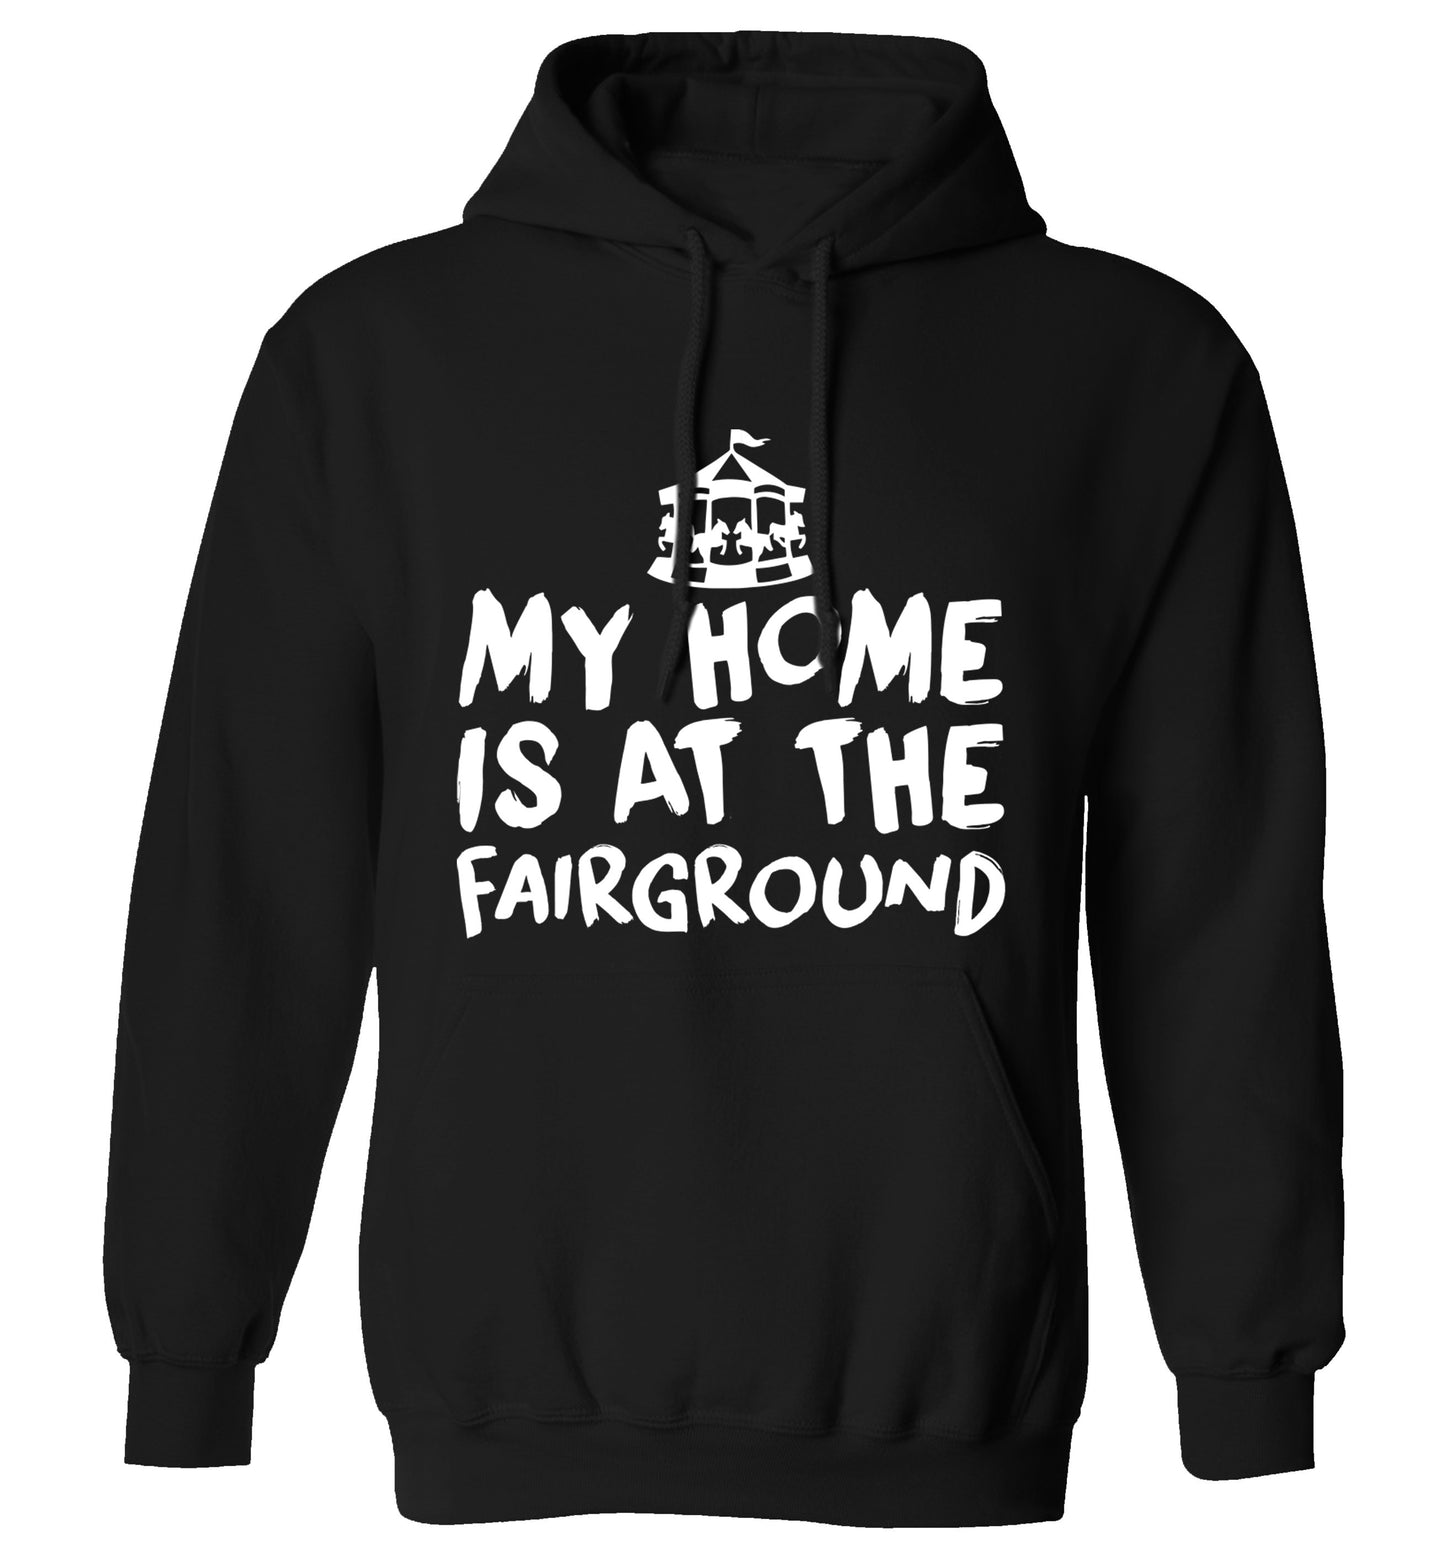 My home is at the fairground adults unisex black hoodie 2XL